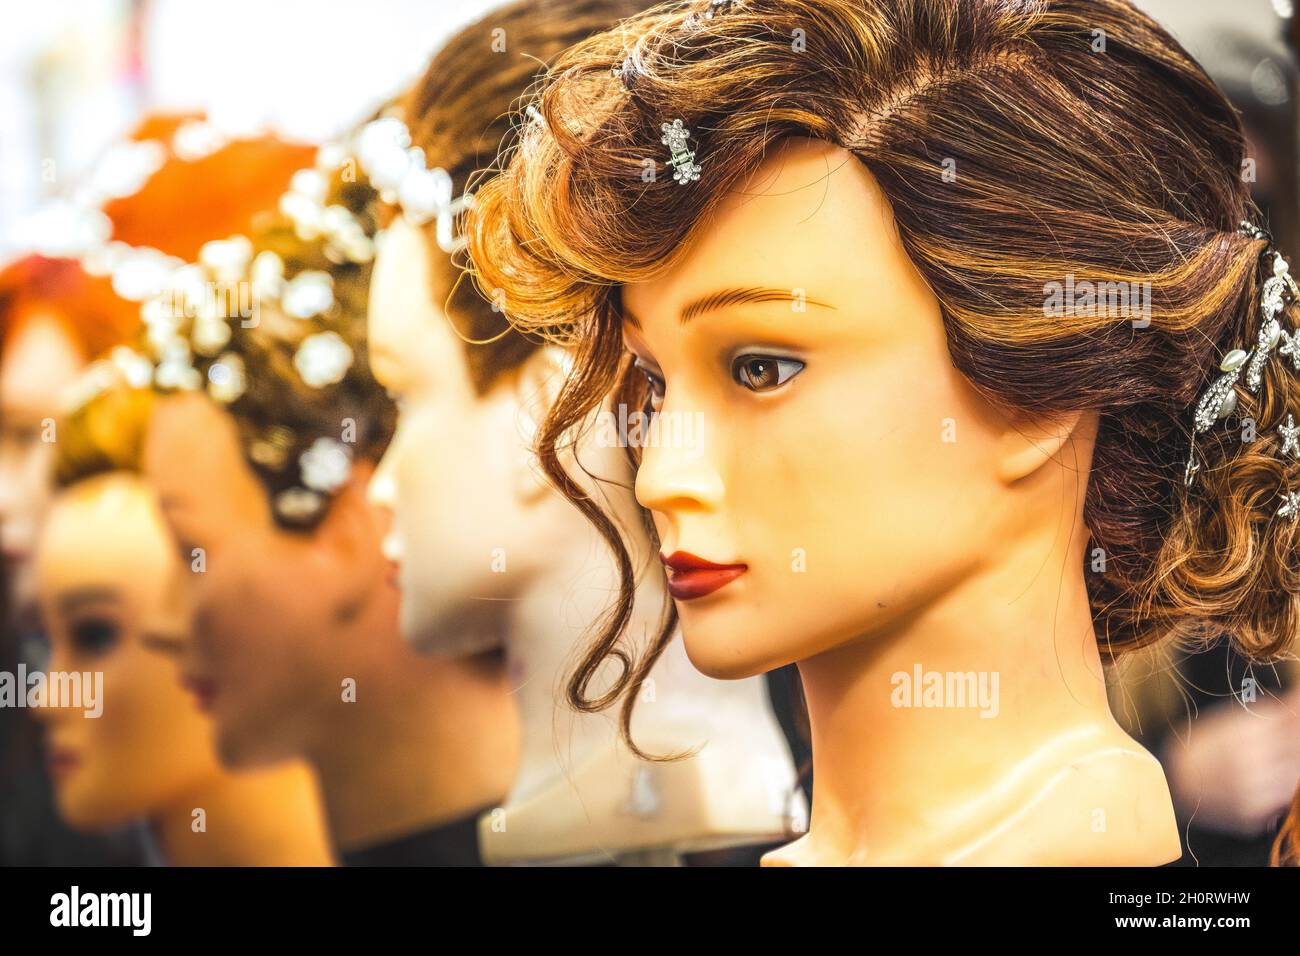 Wig Head in Mannequins, Dress Forms & Wig Heads